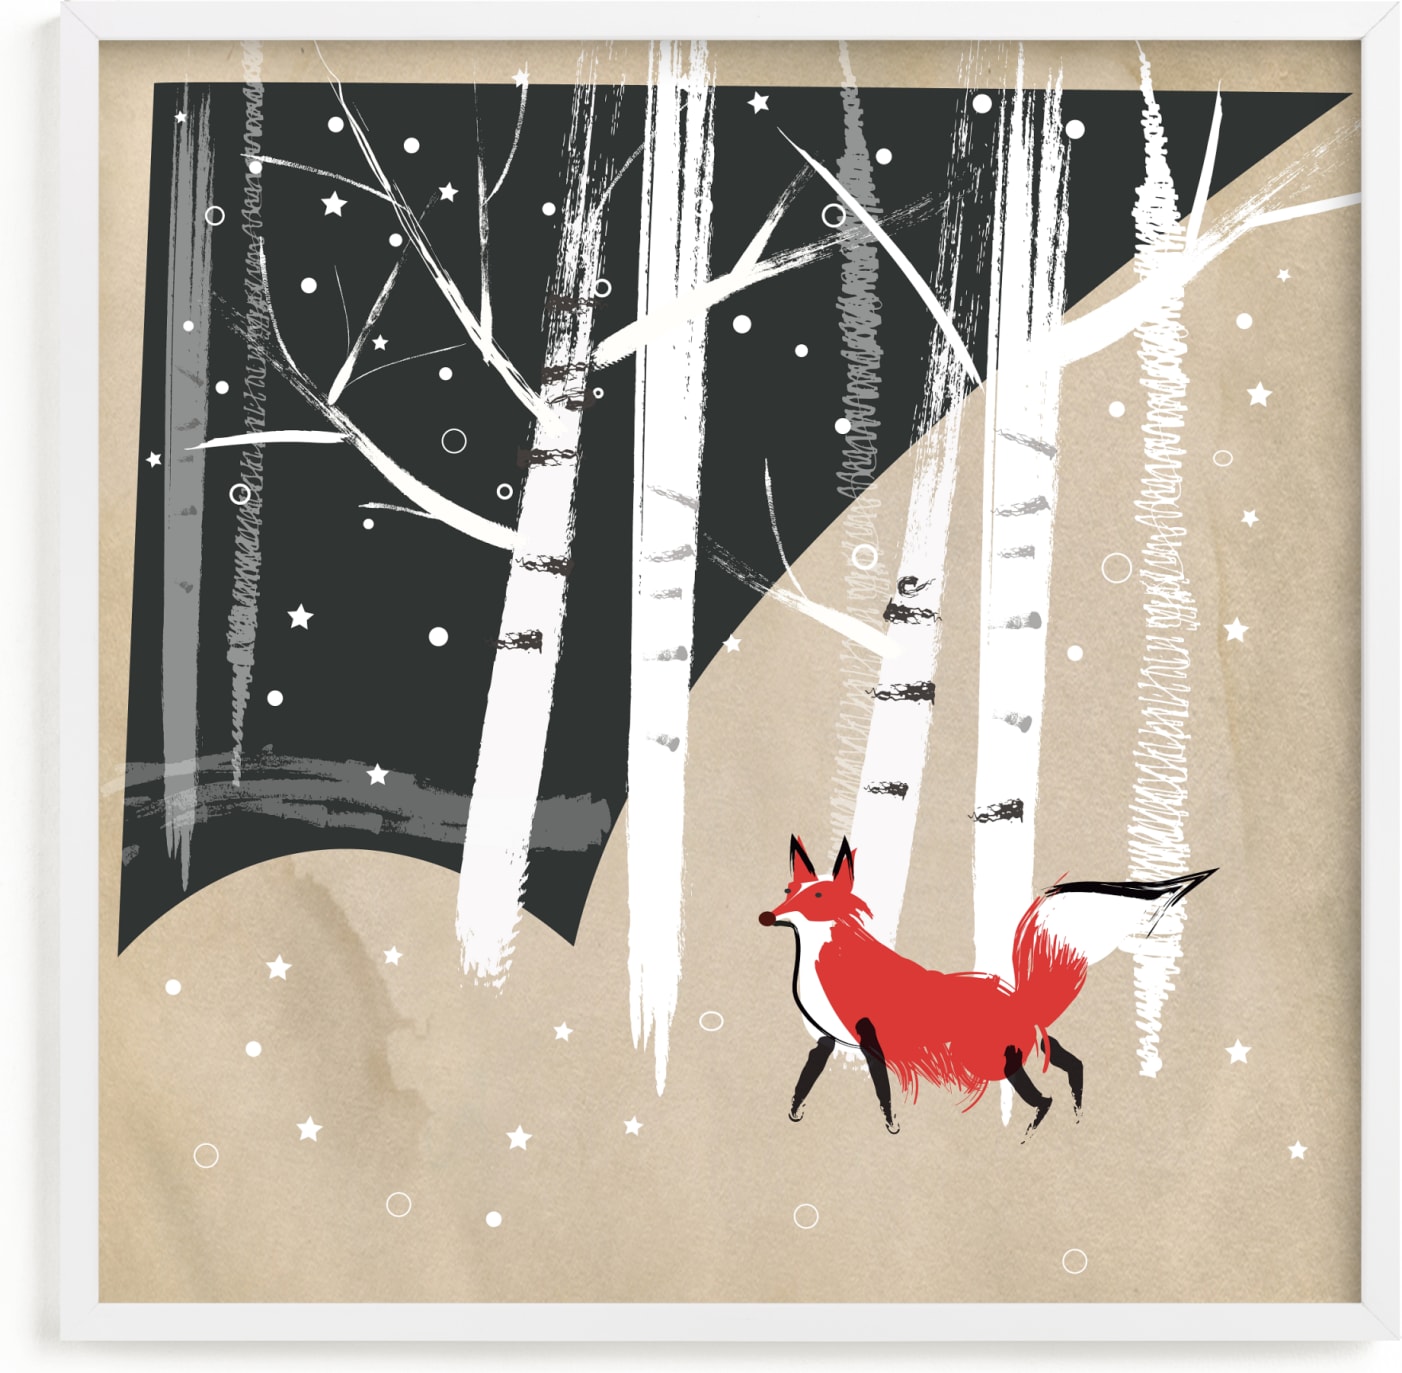 This is a black and white kids wall art by Annie Bakst called Foxy Woods.